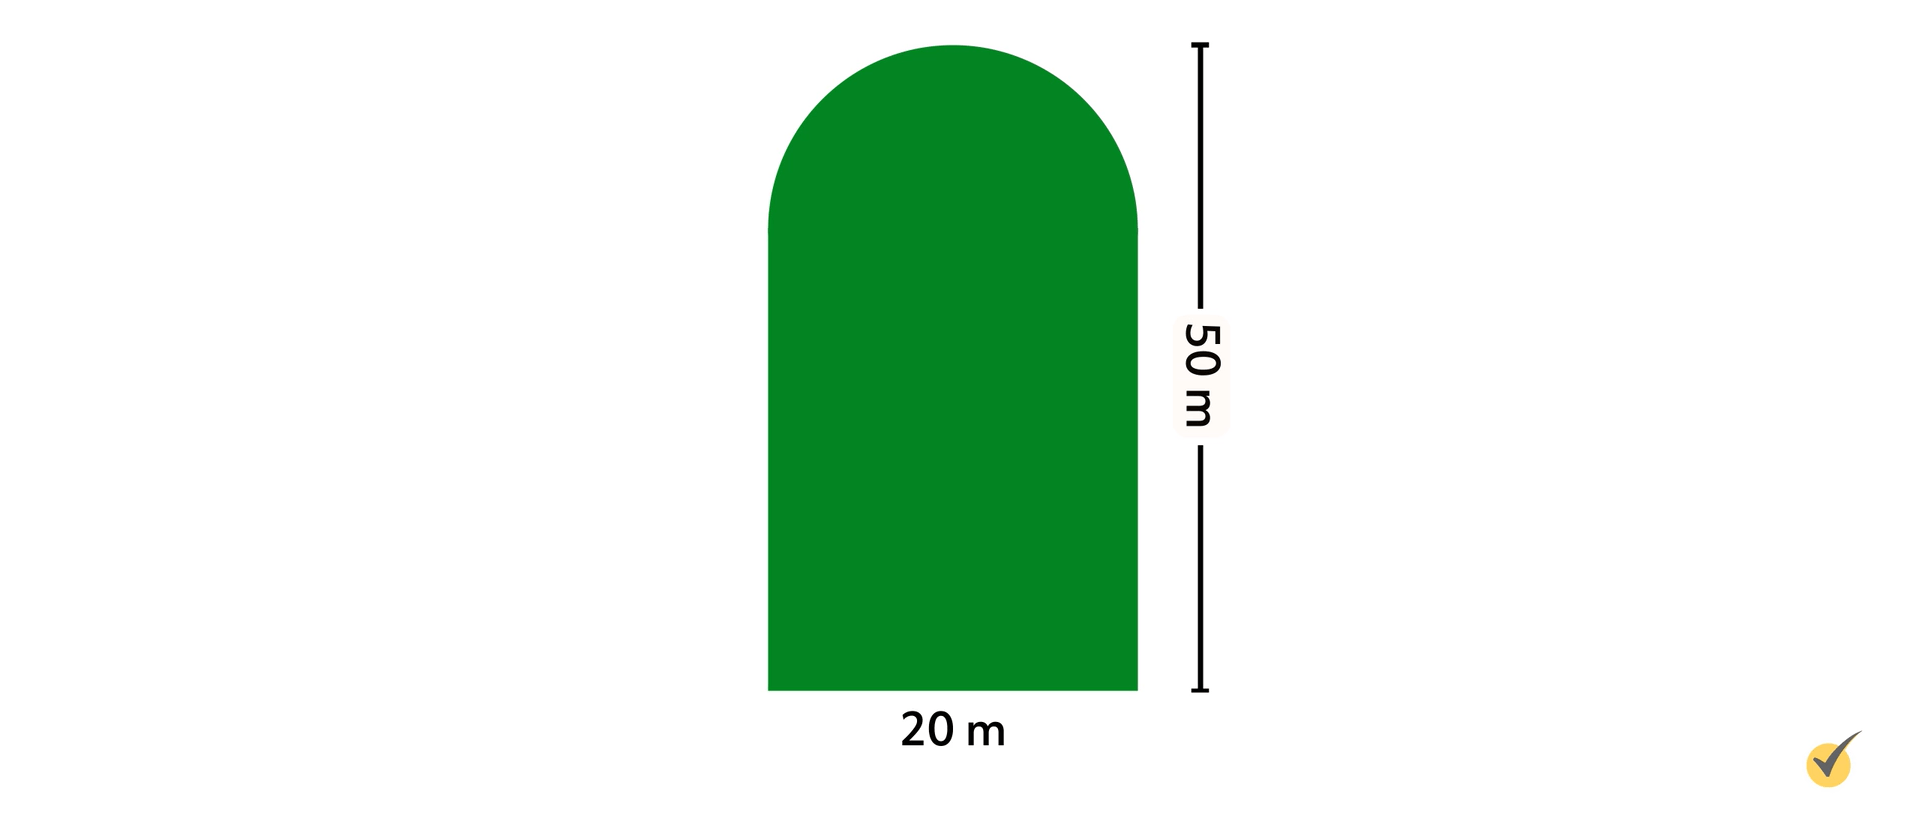 Image of a 'tombstone' shape with a length of 20m, and a height of 50m.